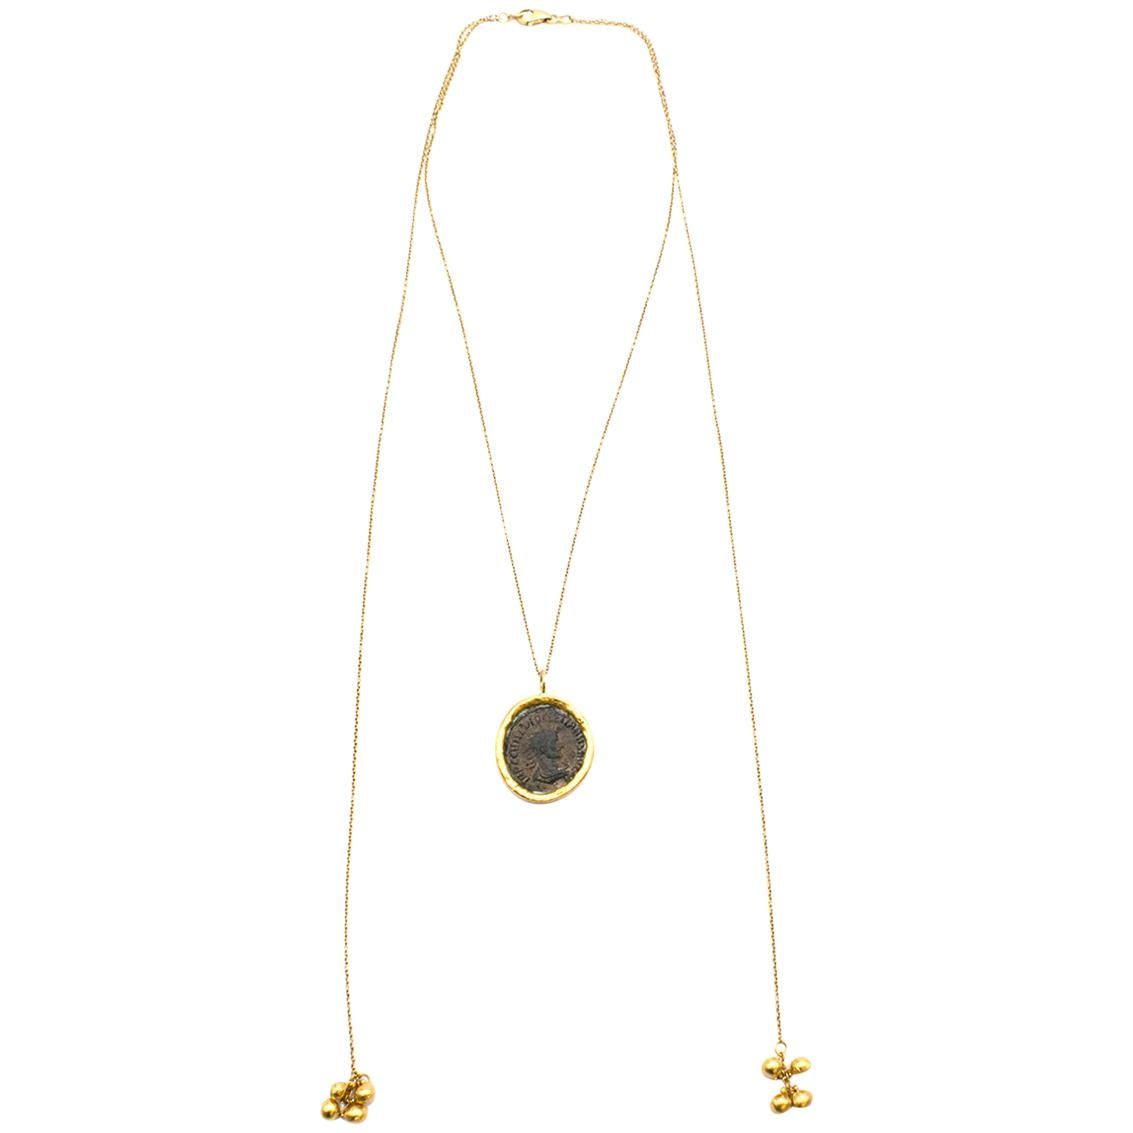 Bespoke 18 Karat Yellow Gold Coin Double Chained Necklace